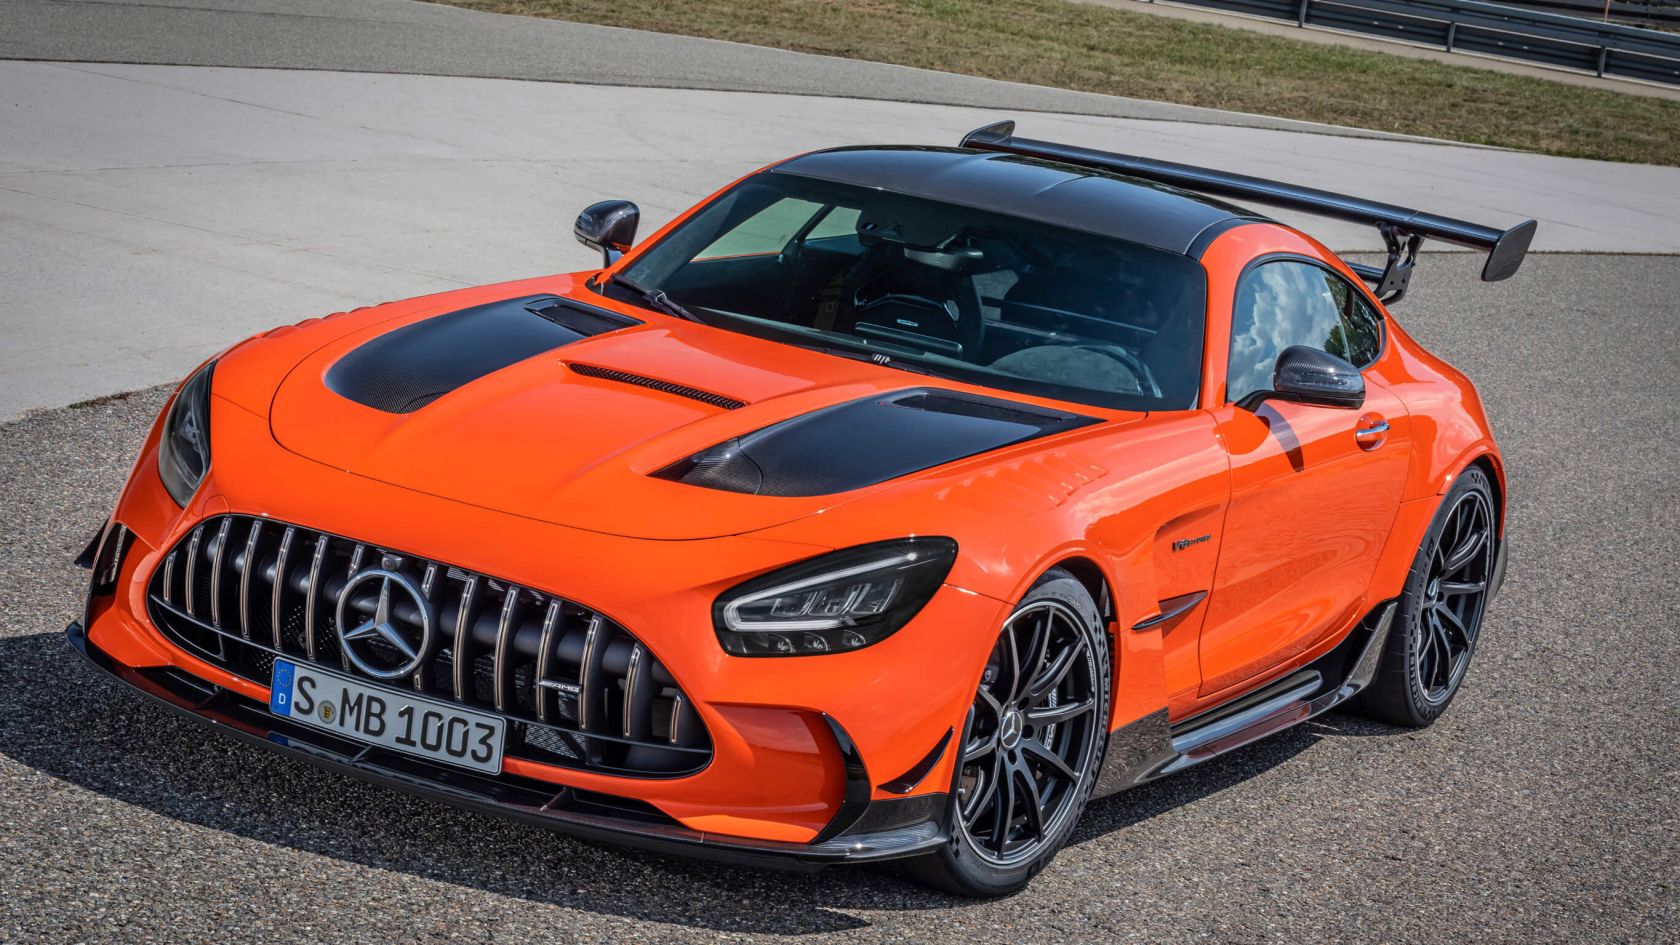 Mercedes Benz AMG GT Black Series: The Real Deal or Pretend Supercar?